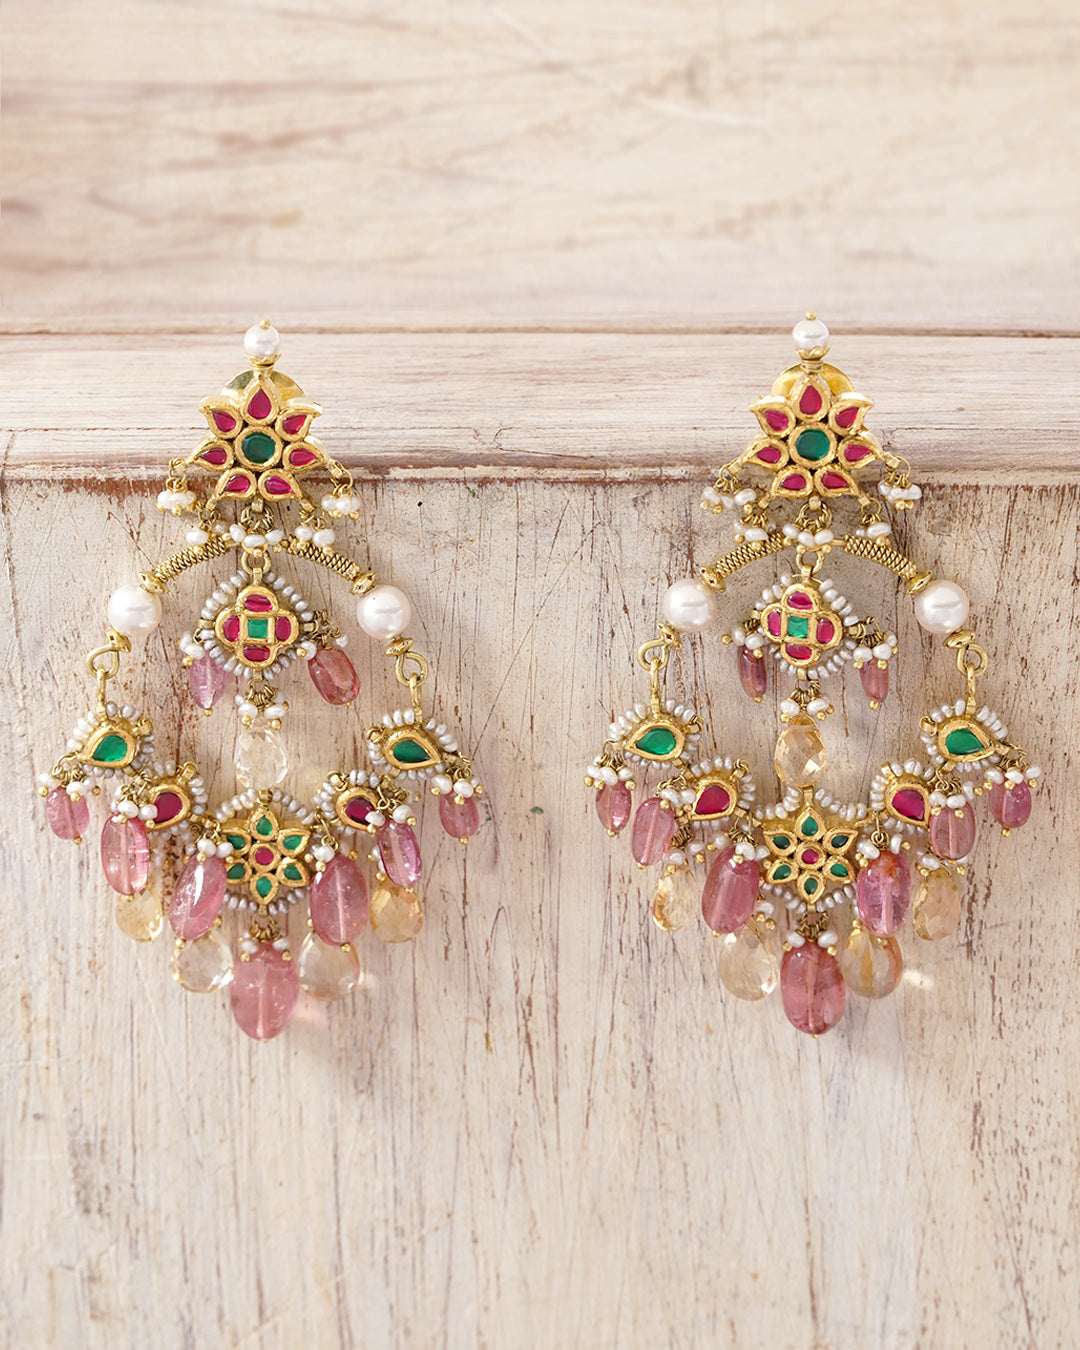 Incredible Collection of Full 4K Earrings Images – Over 999 Stunning Examples